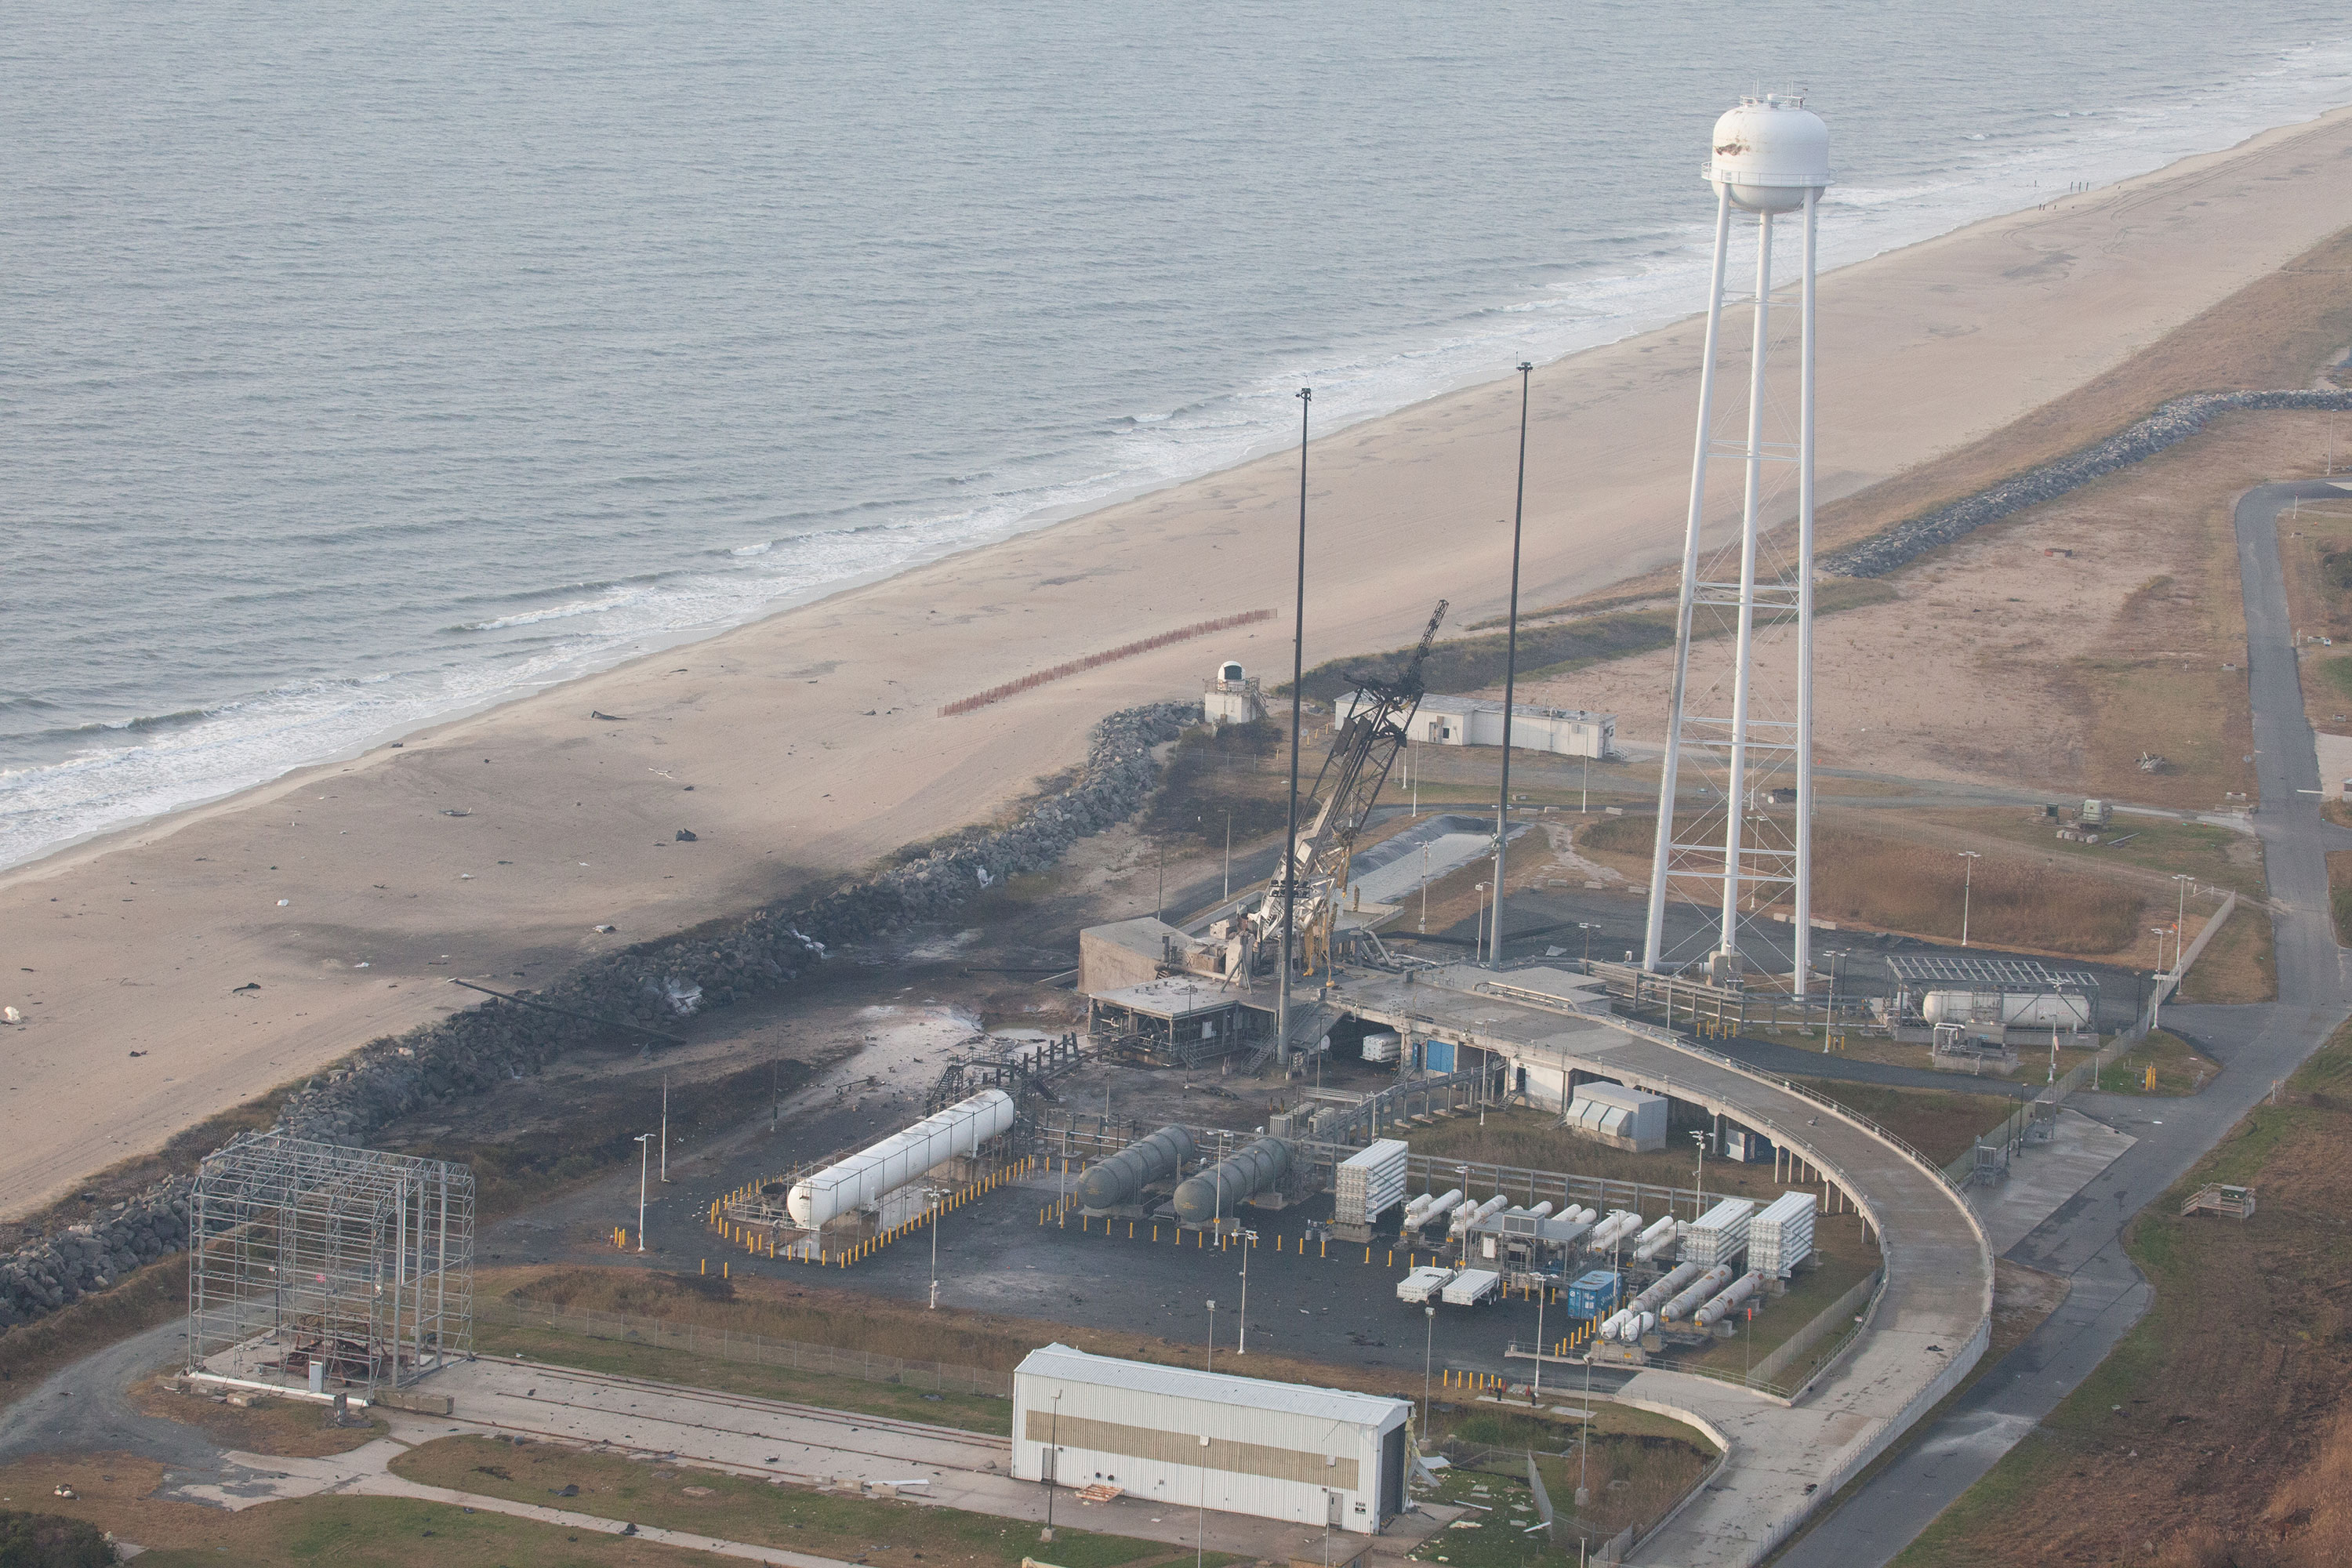 An aerial view of the Wallops Island launch facilities taken by the Wallops Incident Response Team Oct. 29 following the failed launch attempt of Orbital Science Corp.'s Antares rocket Oct. 28. Photo Credit: NASA/Terry Zaperach 